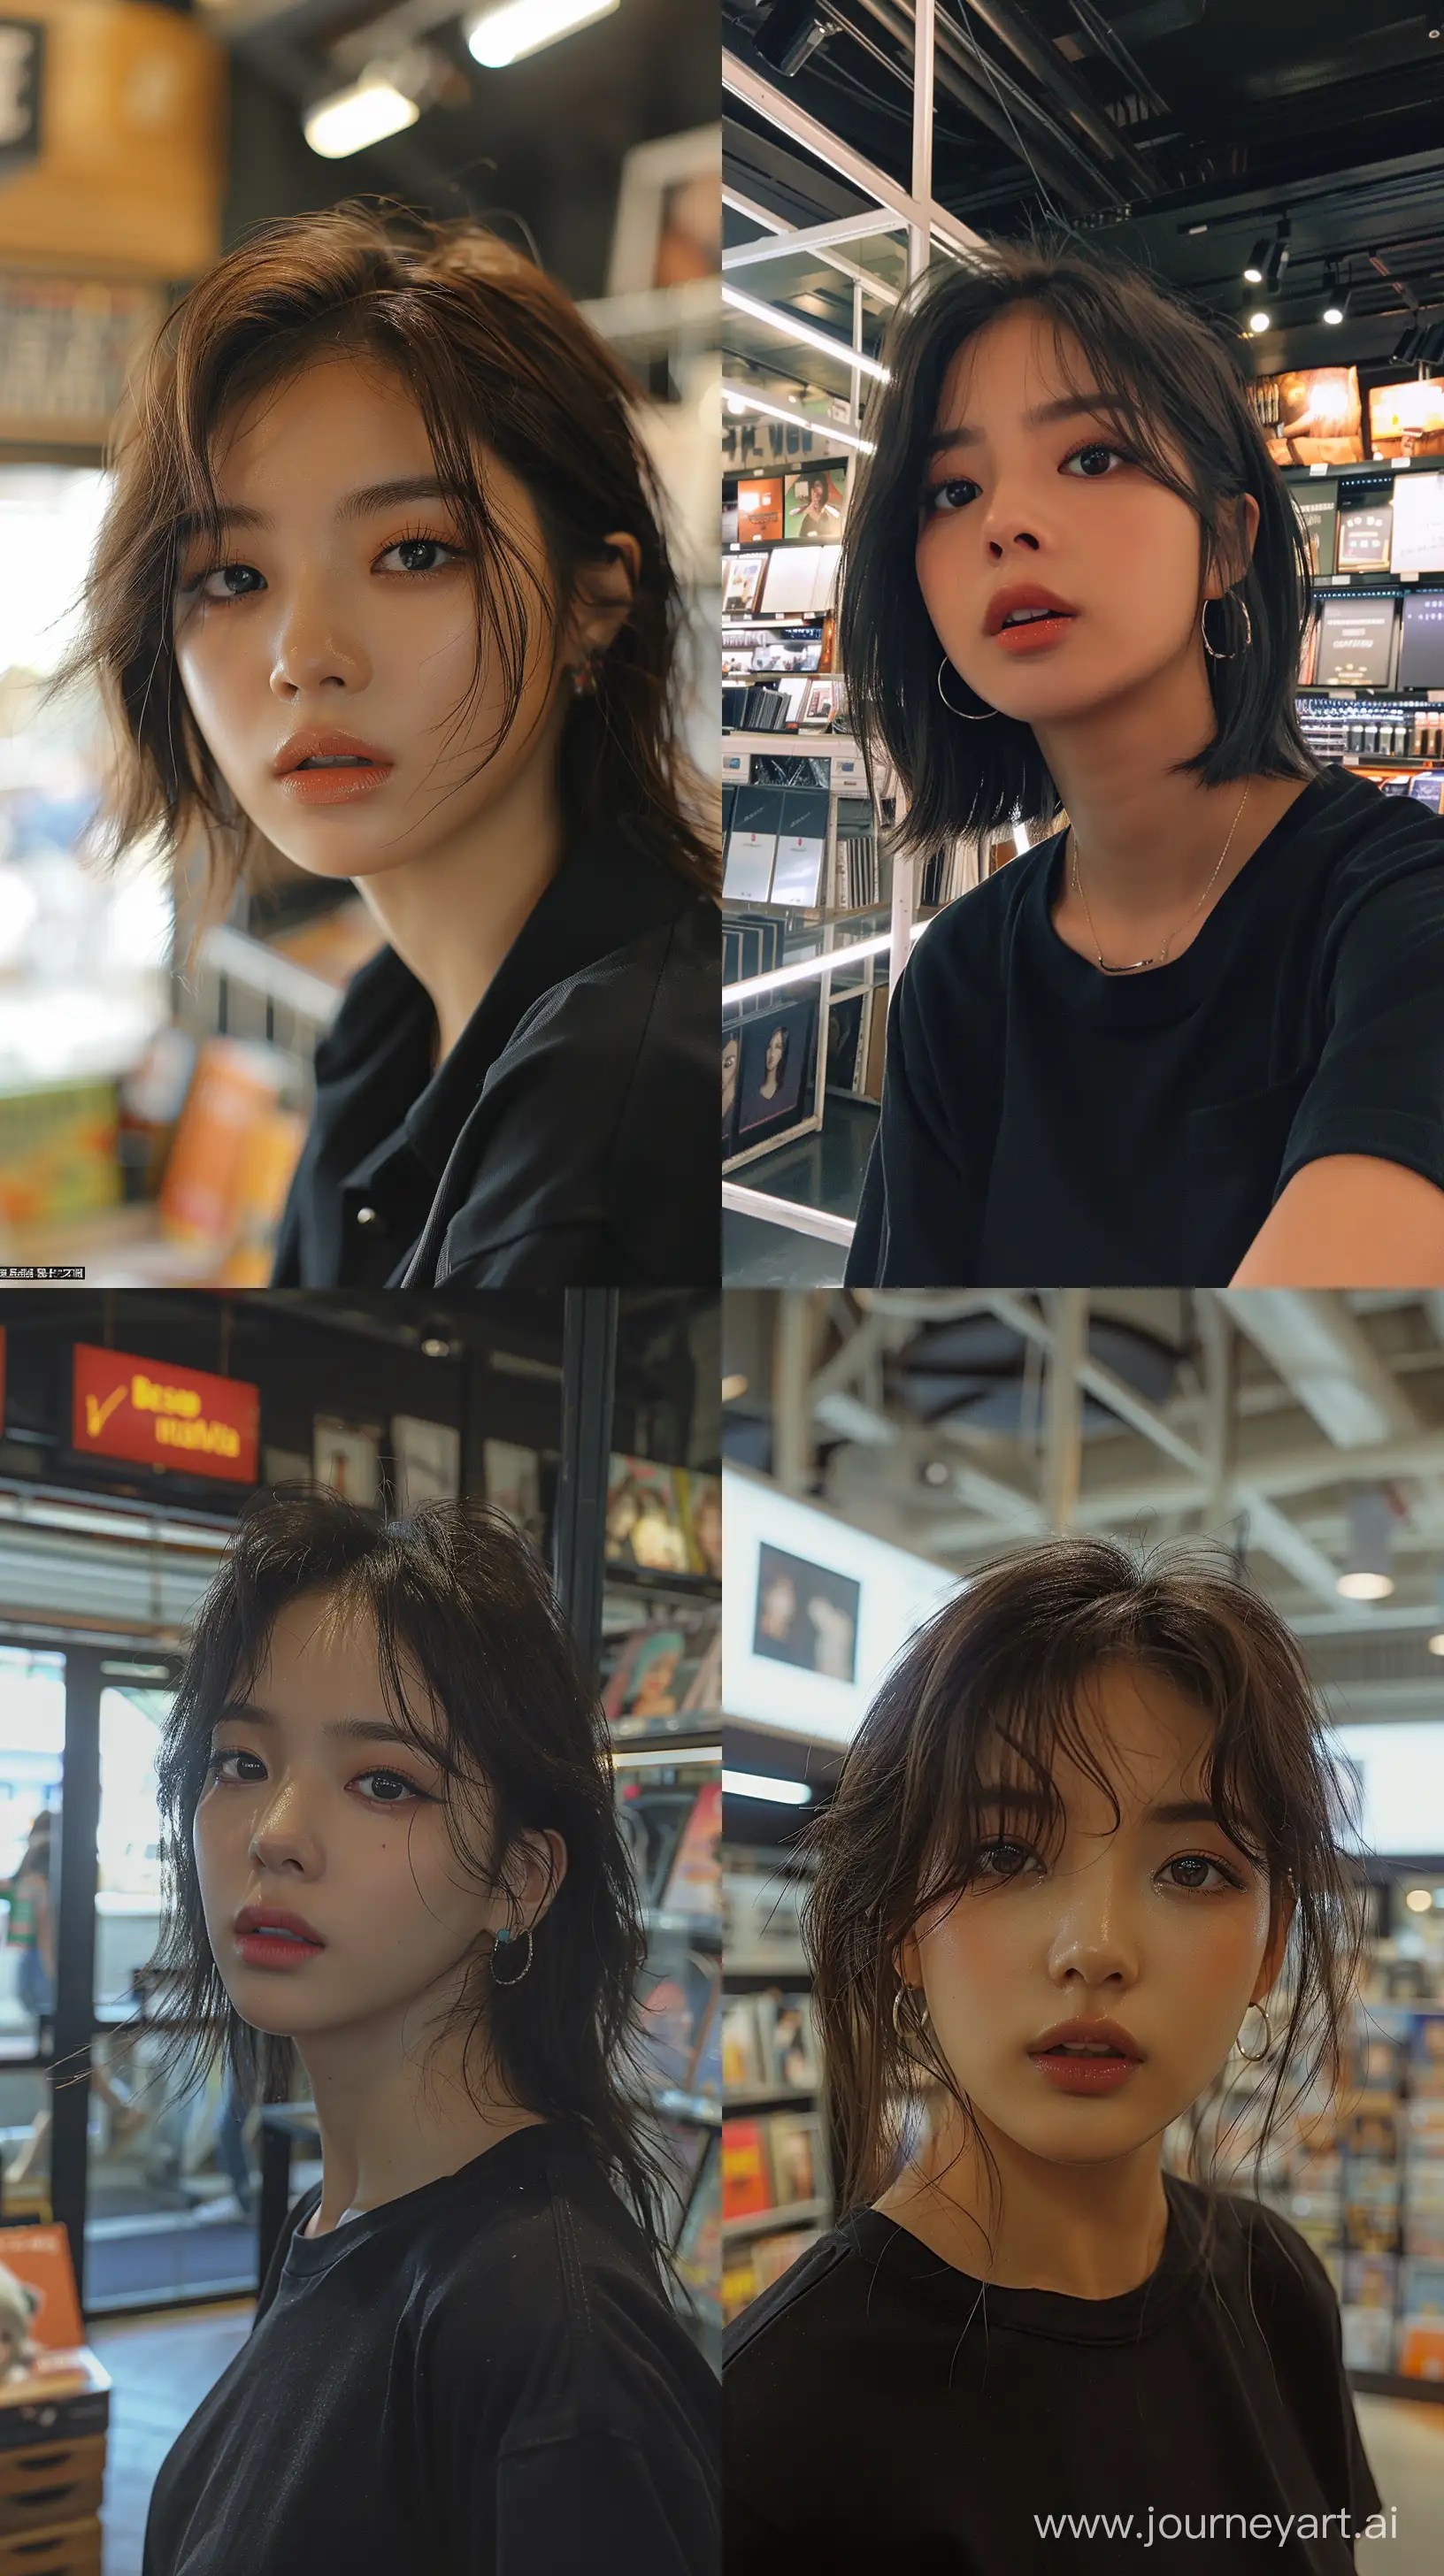 Blackpinks-Jennie-in-Trendy-Wolfcut-Hairstyle-at-Album-Store